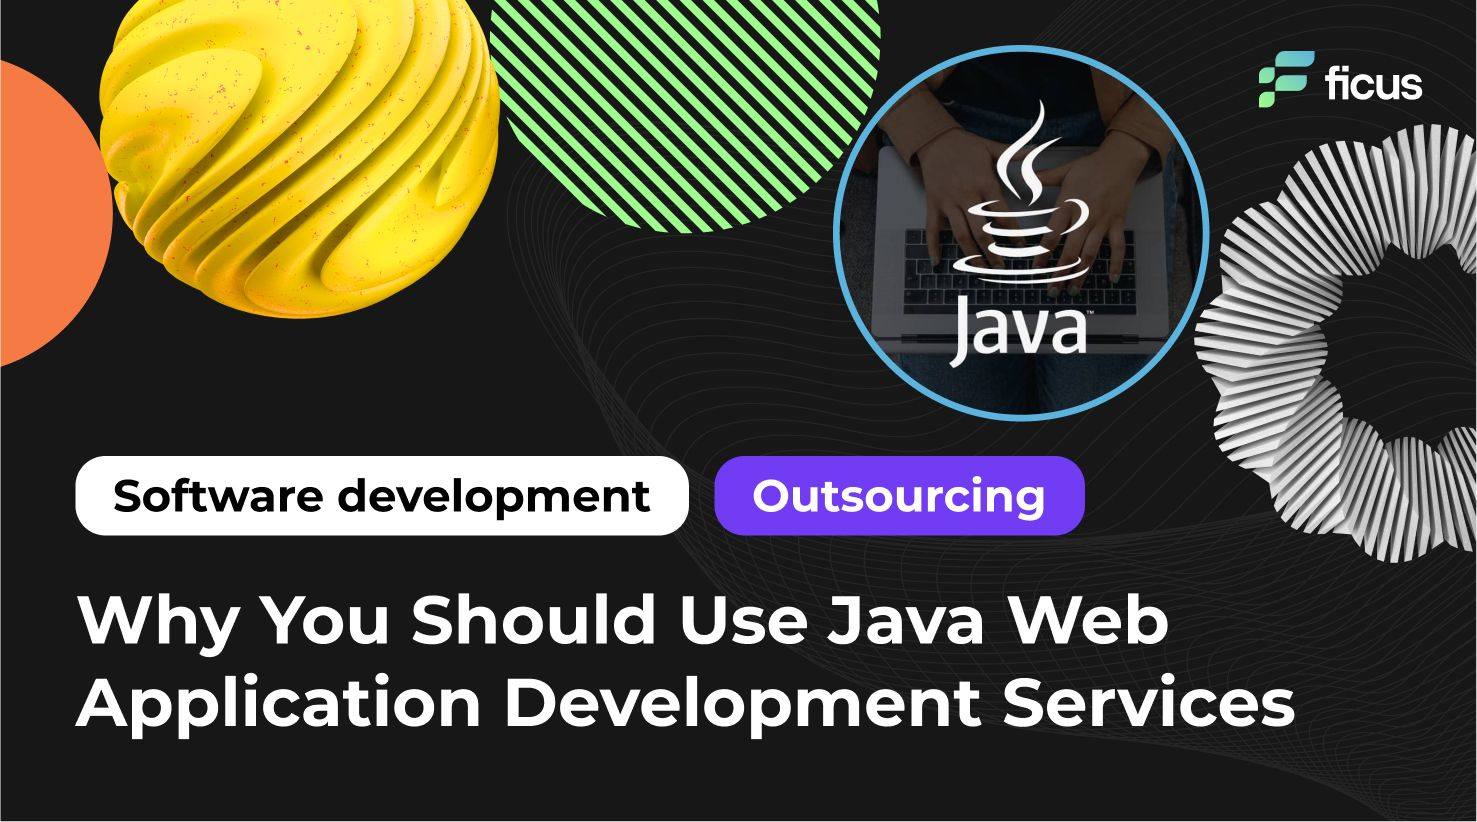 Why You Should Use Java for Web Application Development Services